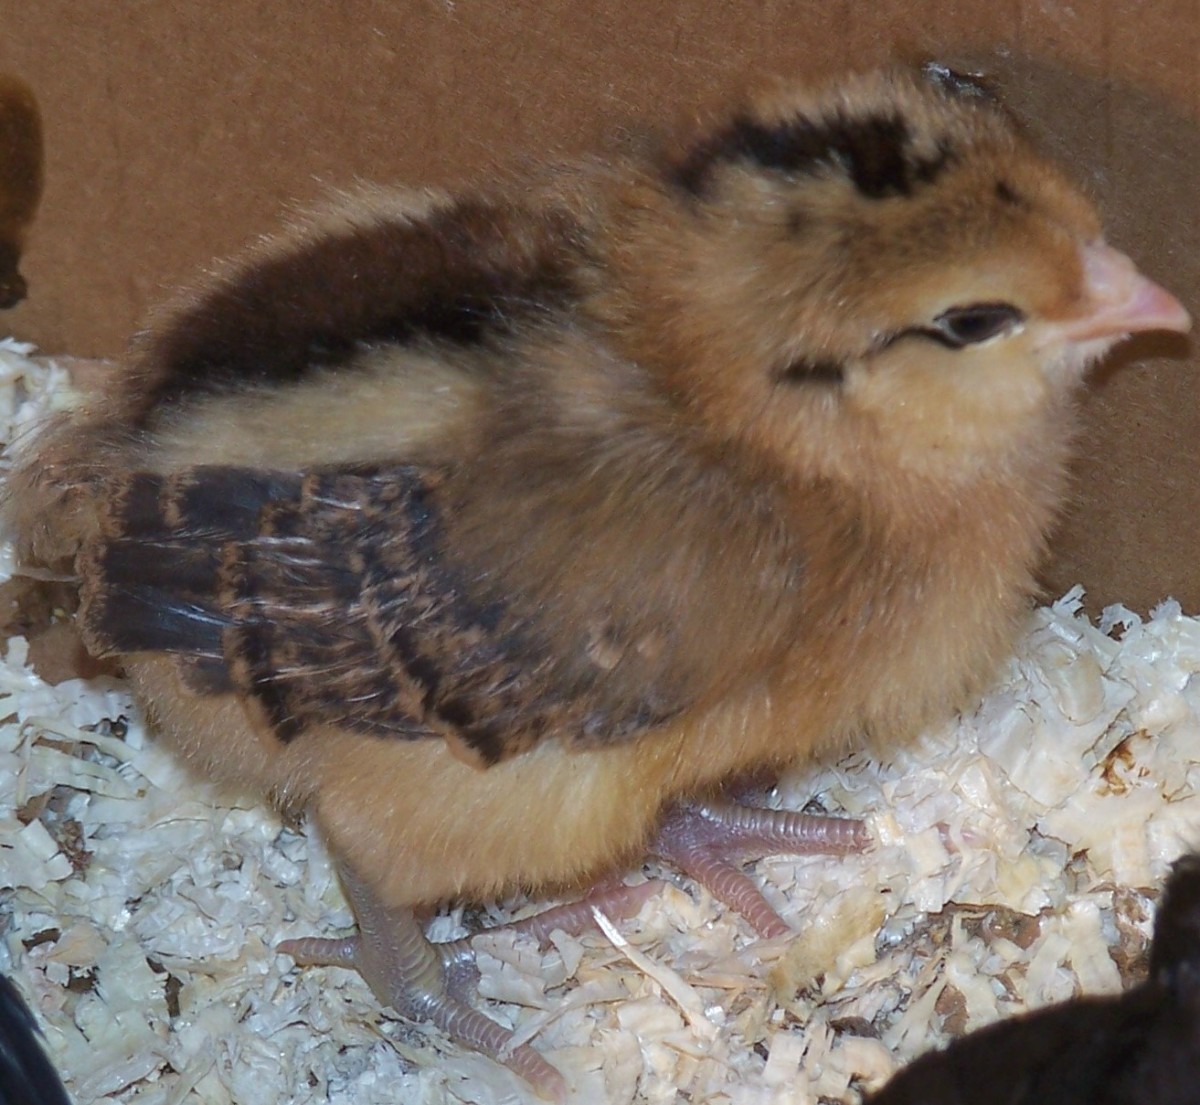 One of my new baby chicks